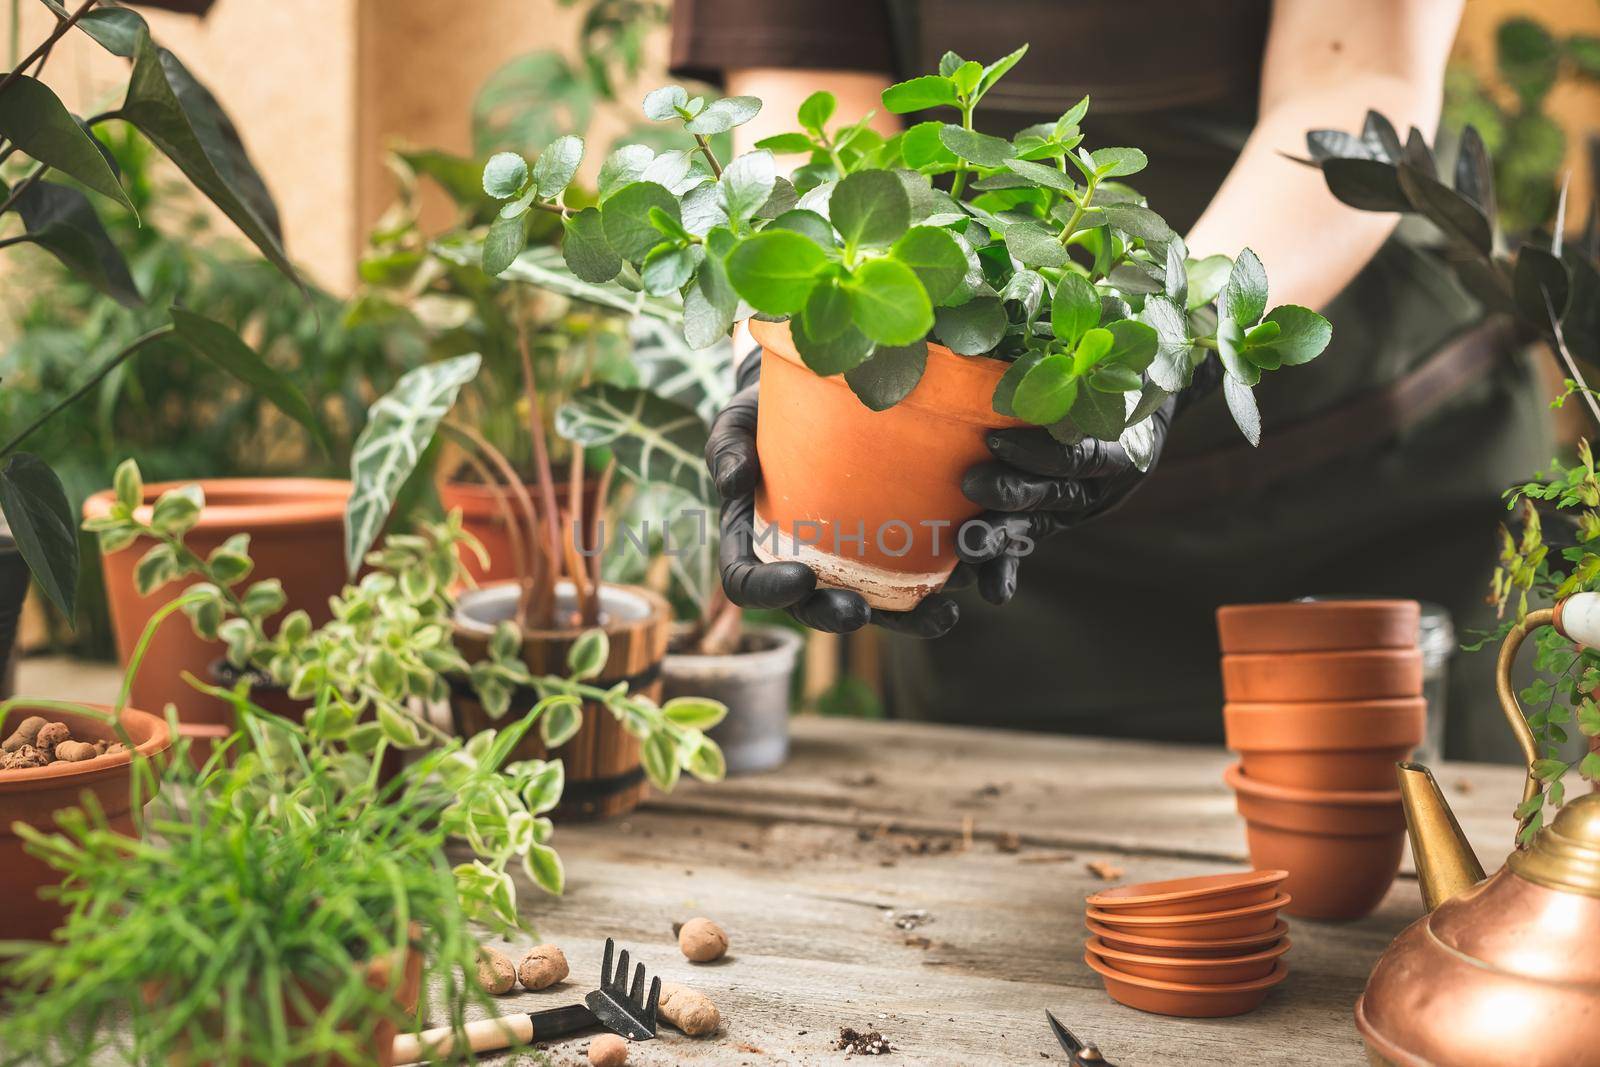 The process of planting Kalanchoe plant in a pot by Syvanych